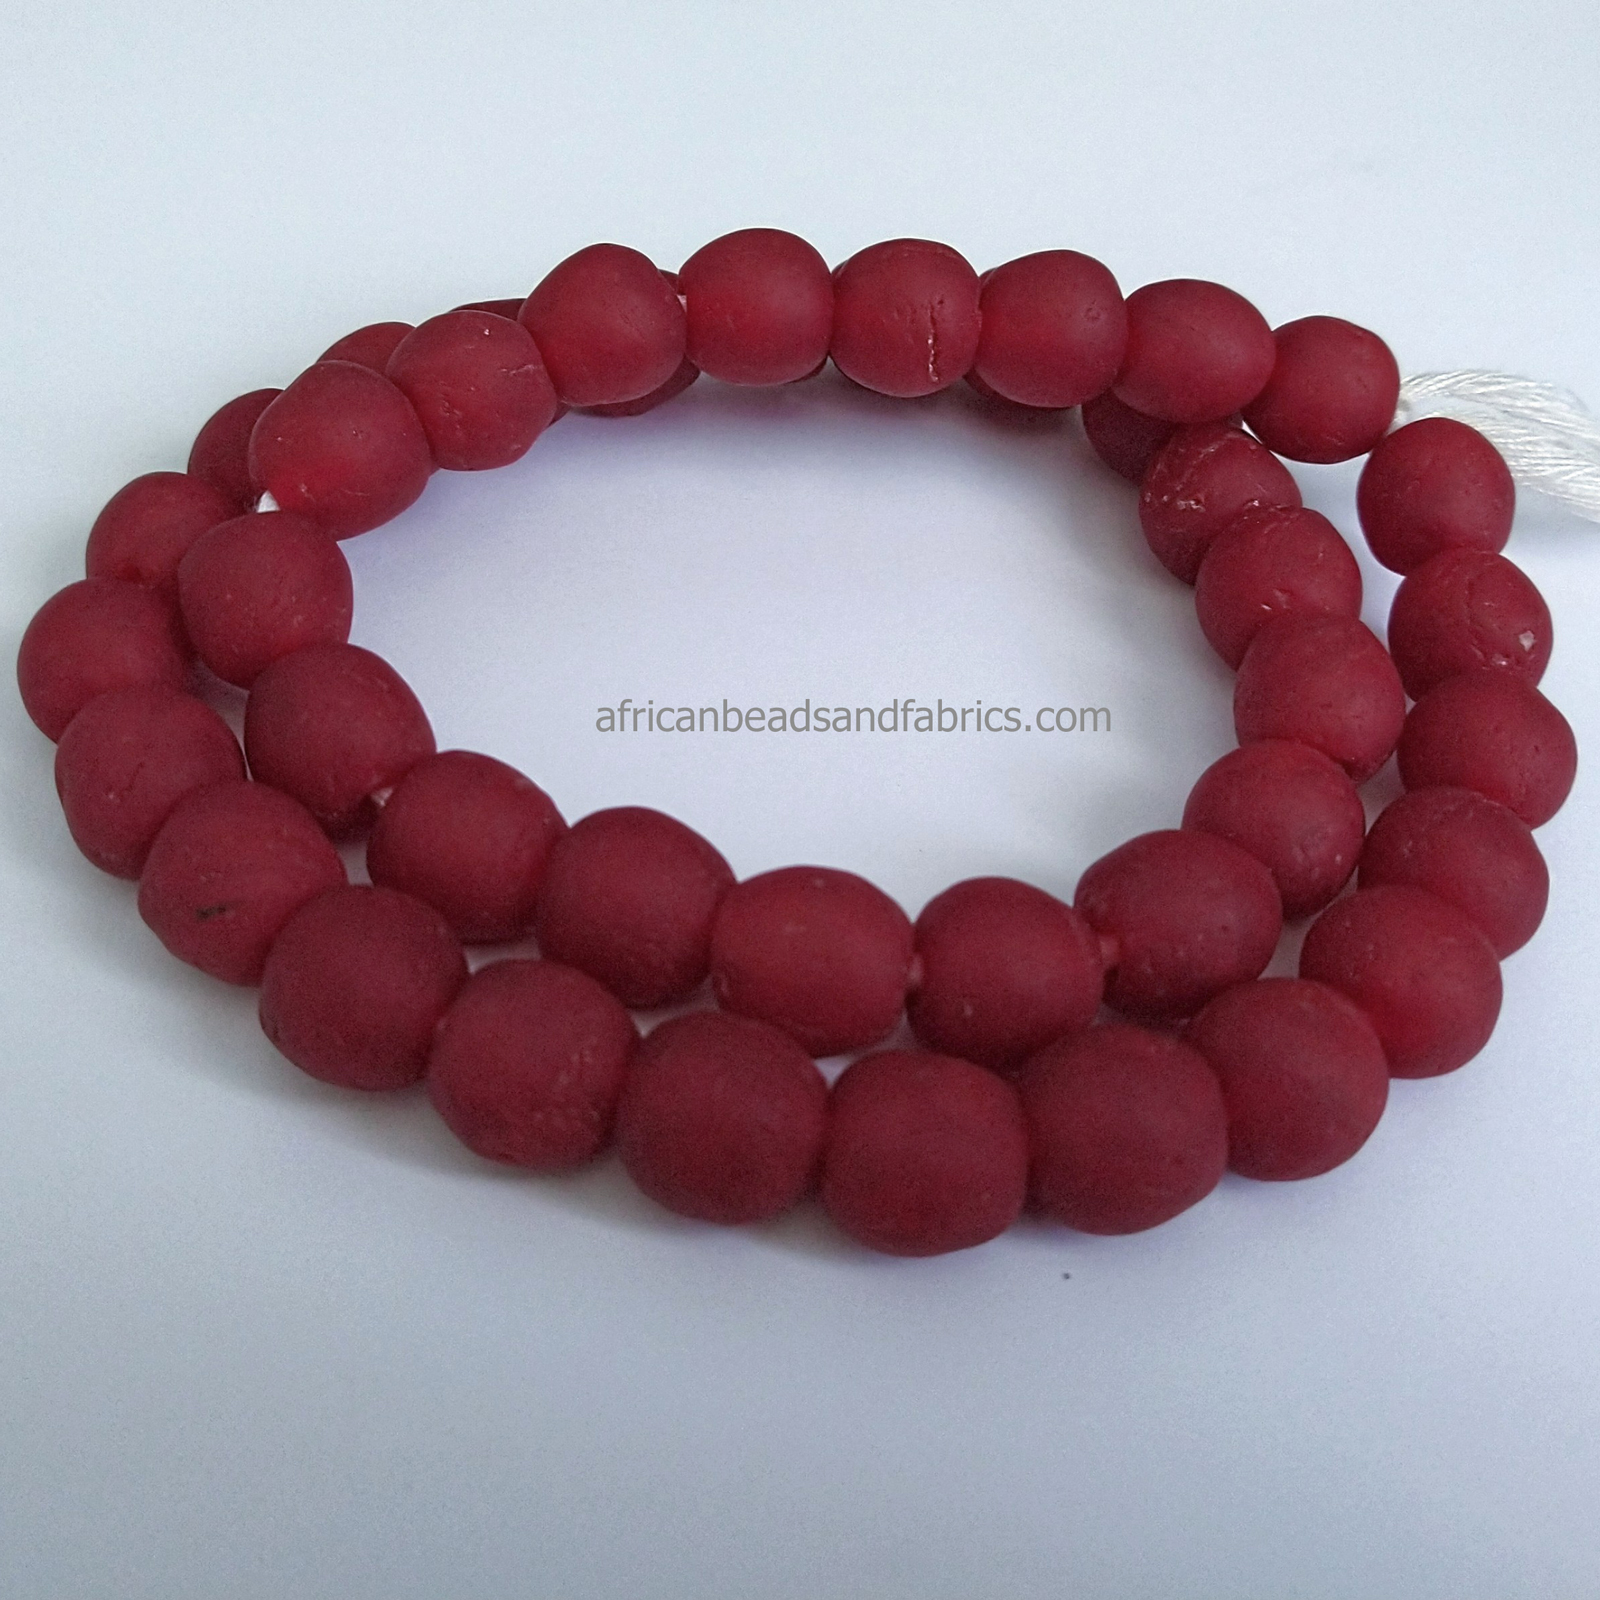 African-Beads-Ghana-KroboEthnic-Glass-Round-12-to-14mm-red